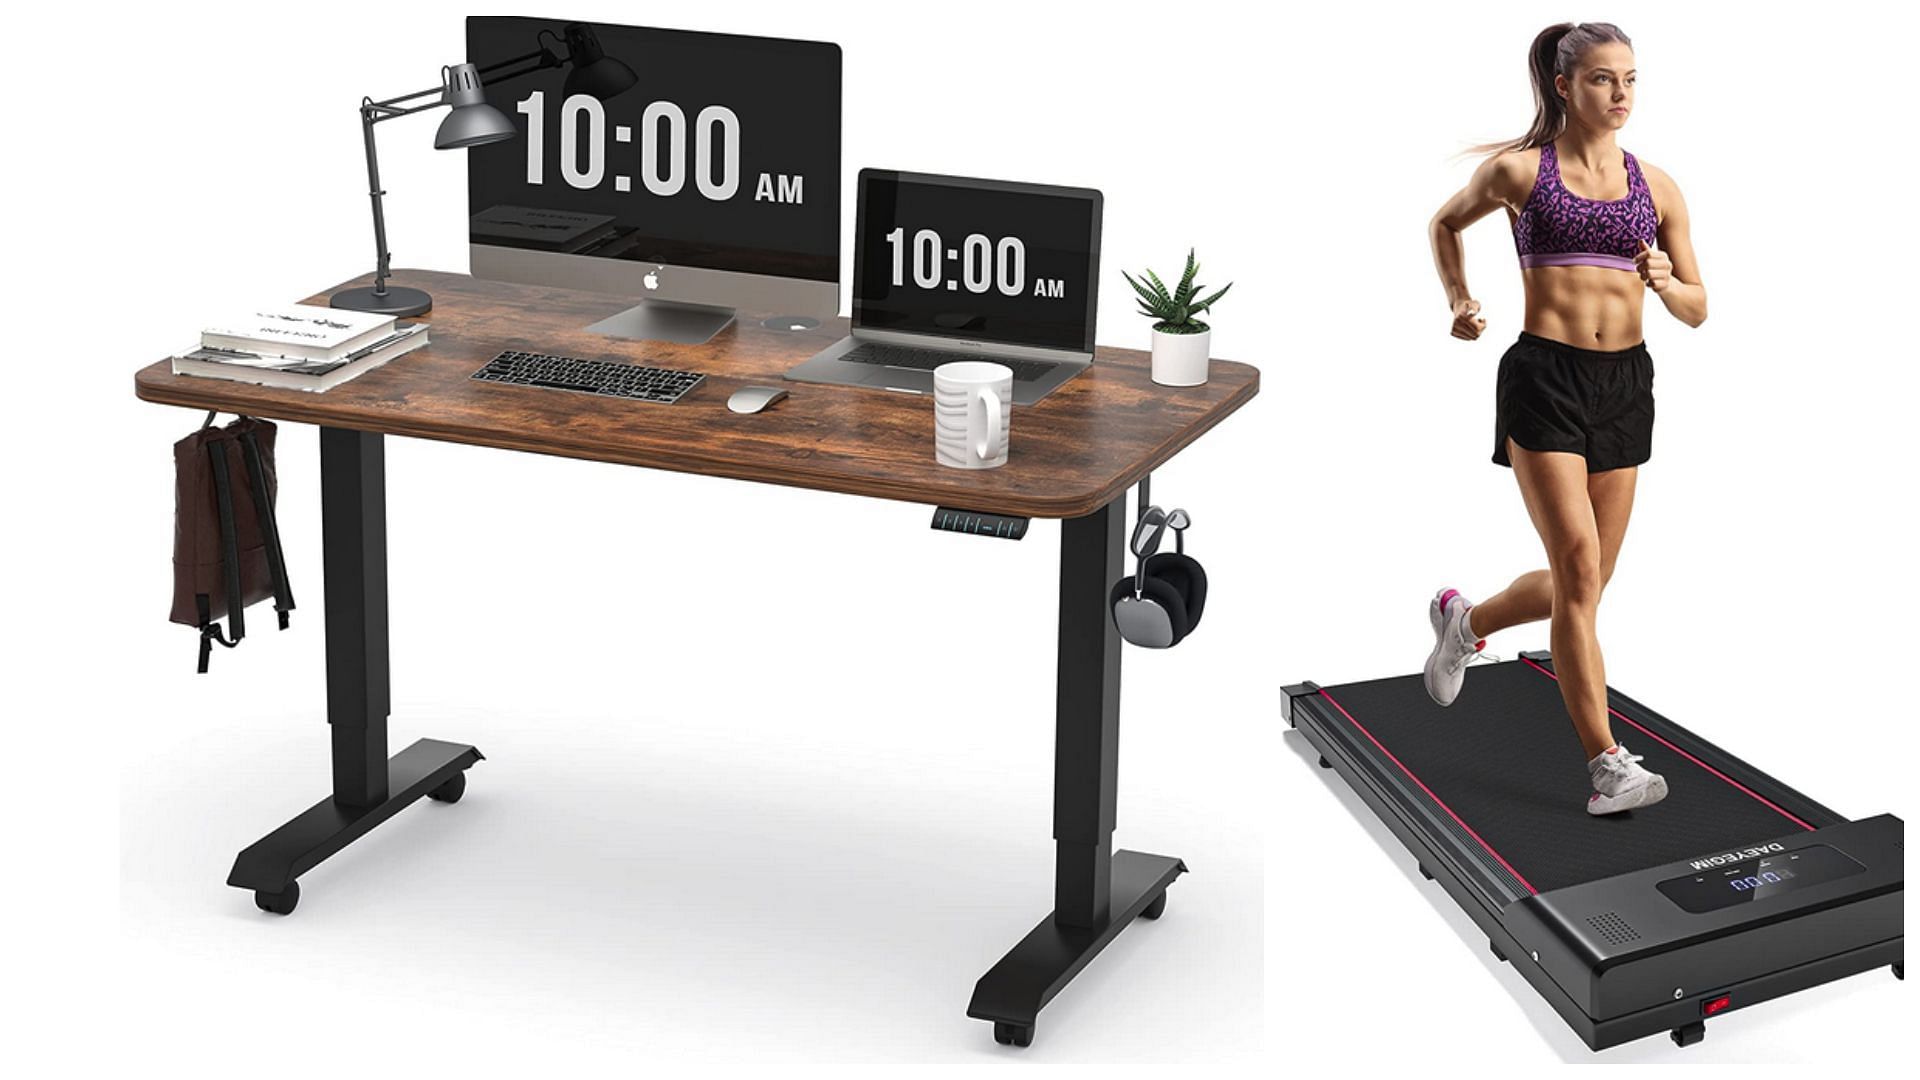 The Monomi electric standing desk and Daeyegim under desk treadmill is available for a huge discount (Image via Amazon)